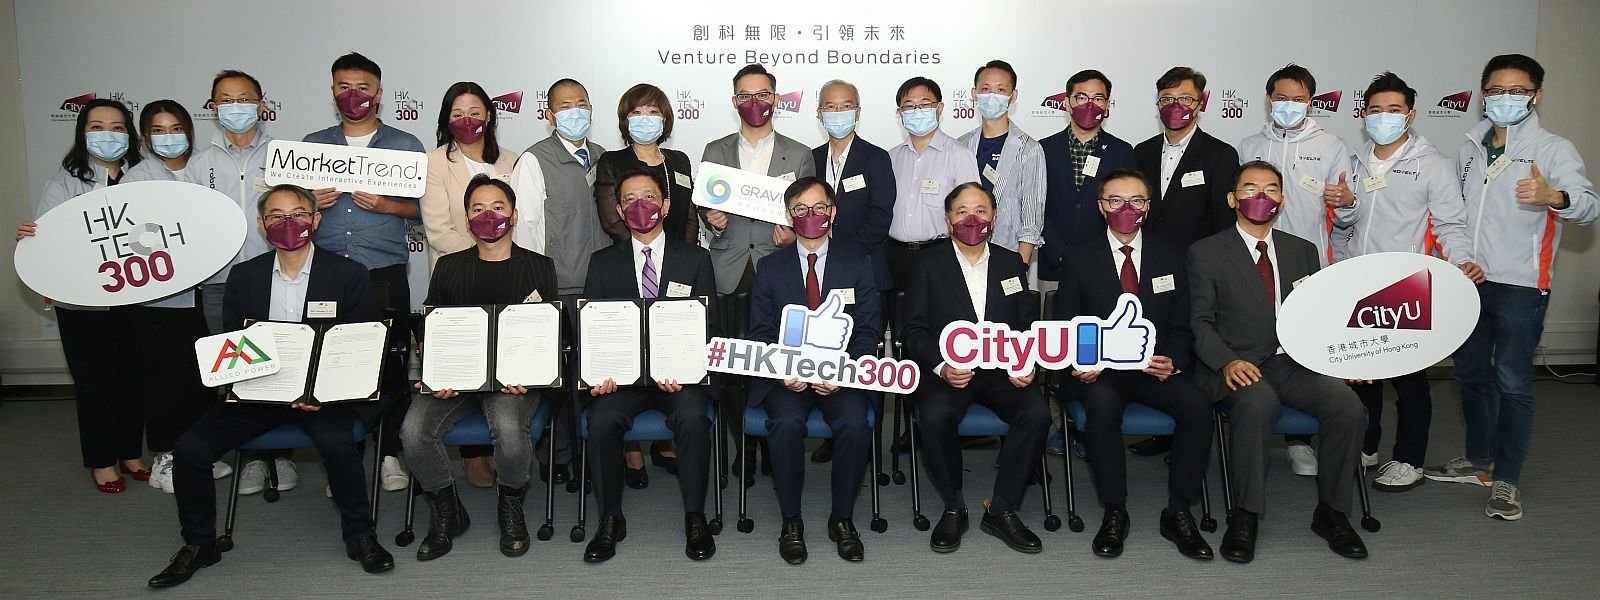 HK Tech 300 additional annual angel fund investment